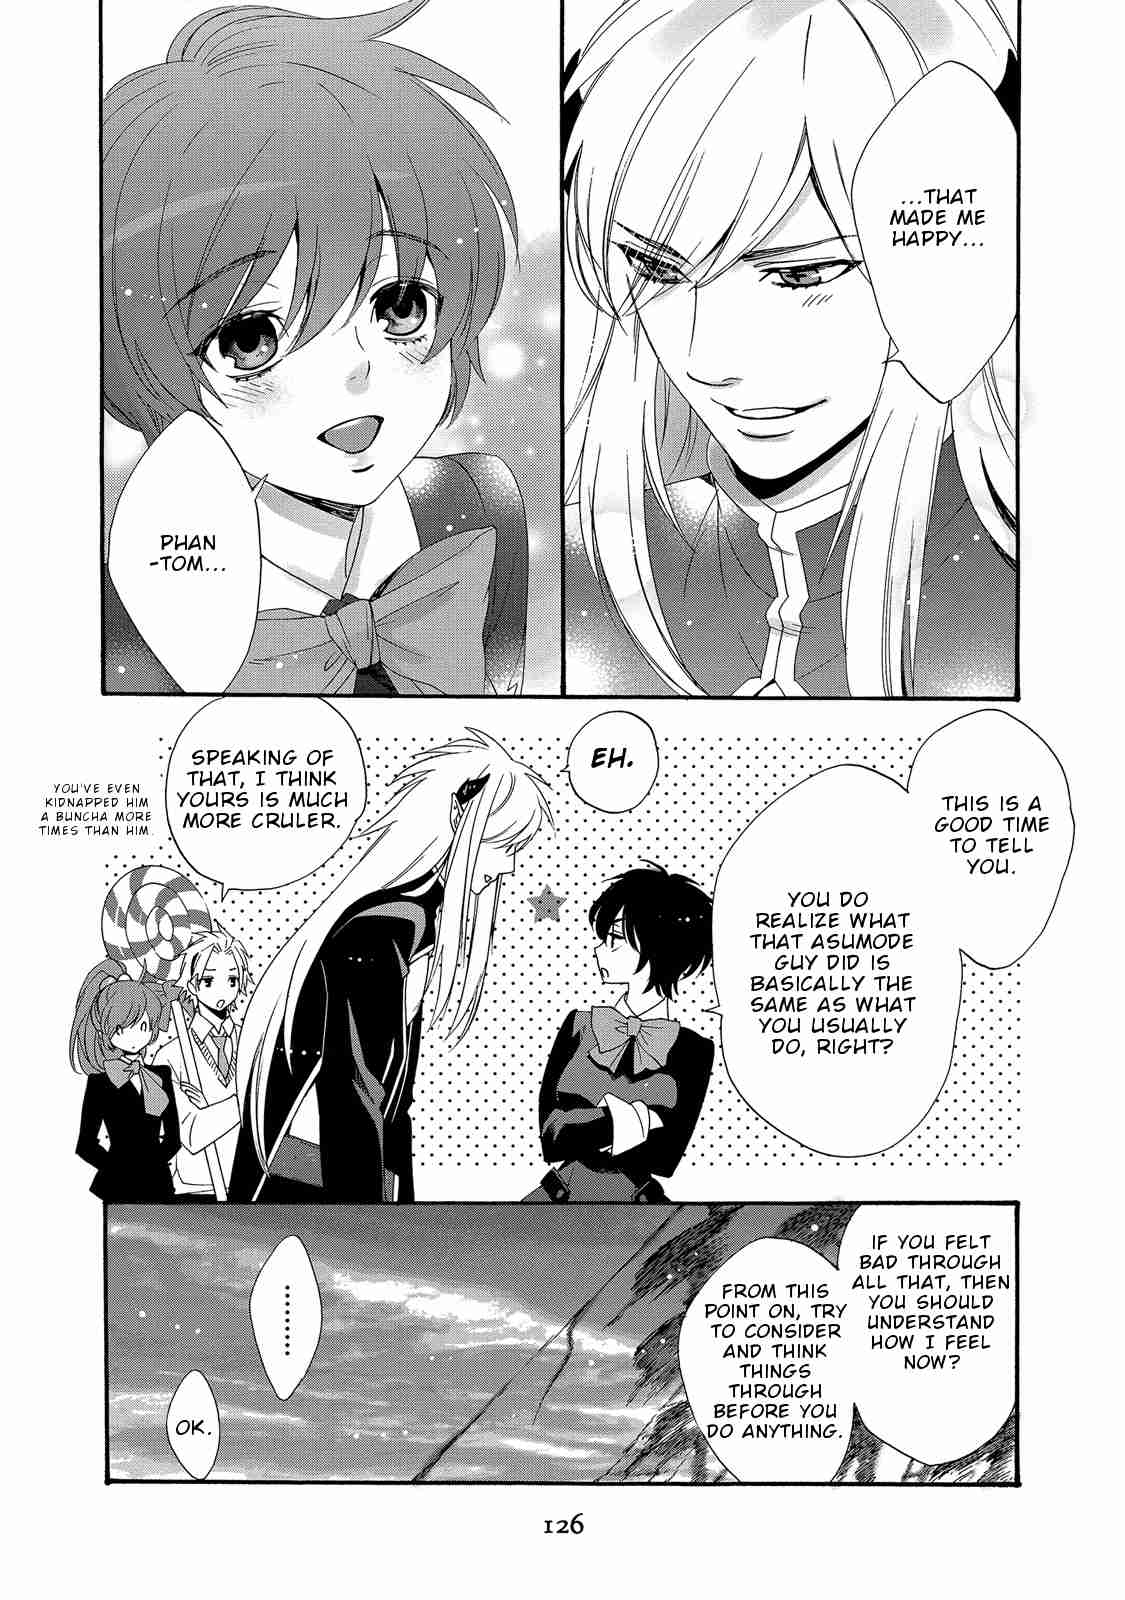 Magical Change Vol. 2 Ch. 12 The Lustful Ruler Asumode Appears